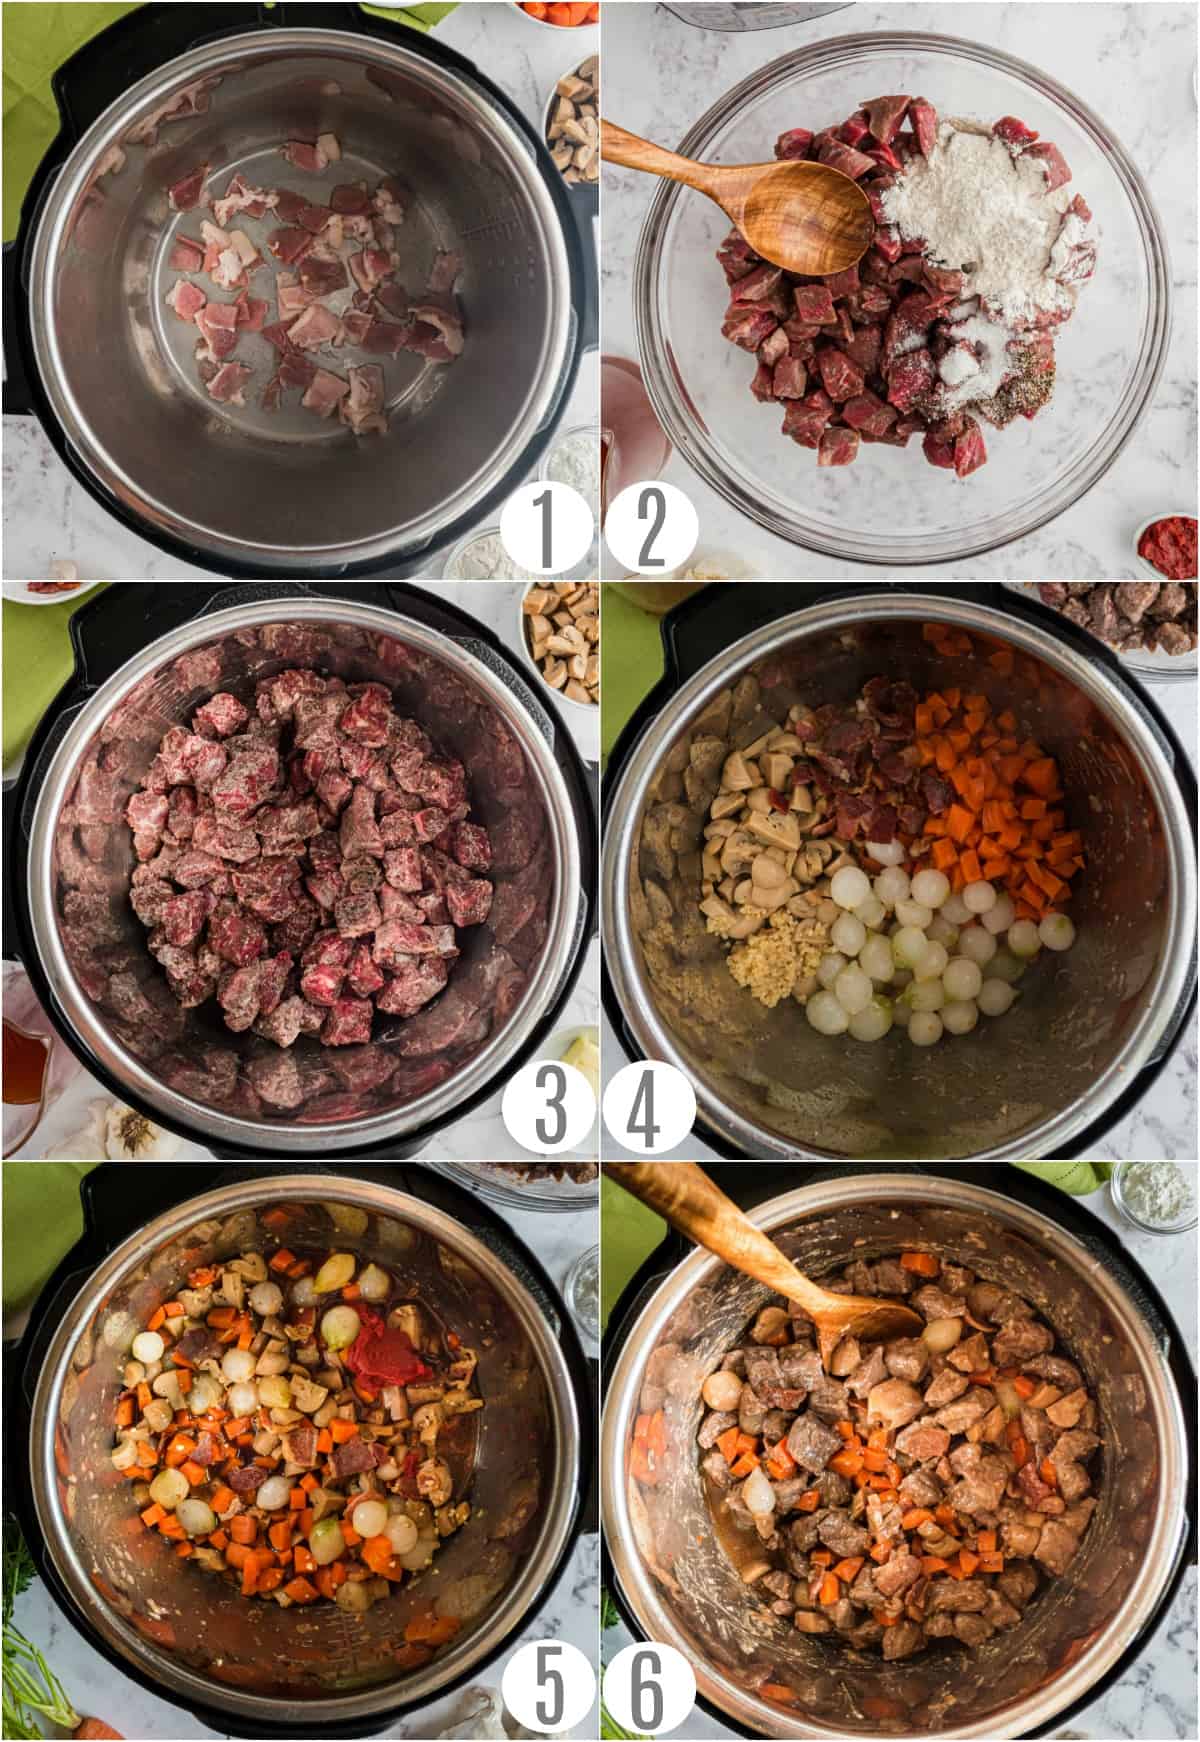 Step by step instructions showing how to make instant pot beef bourguignon.